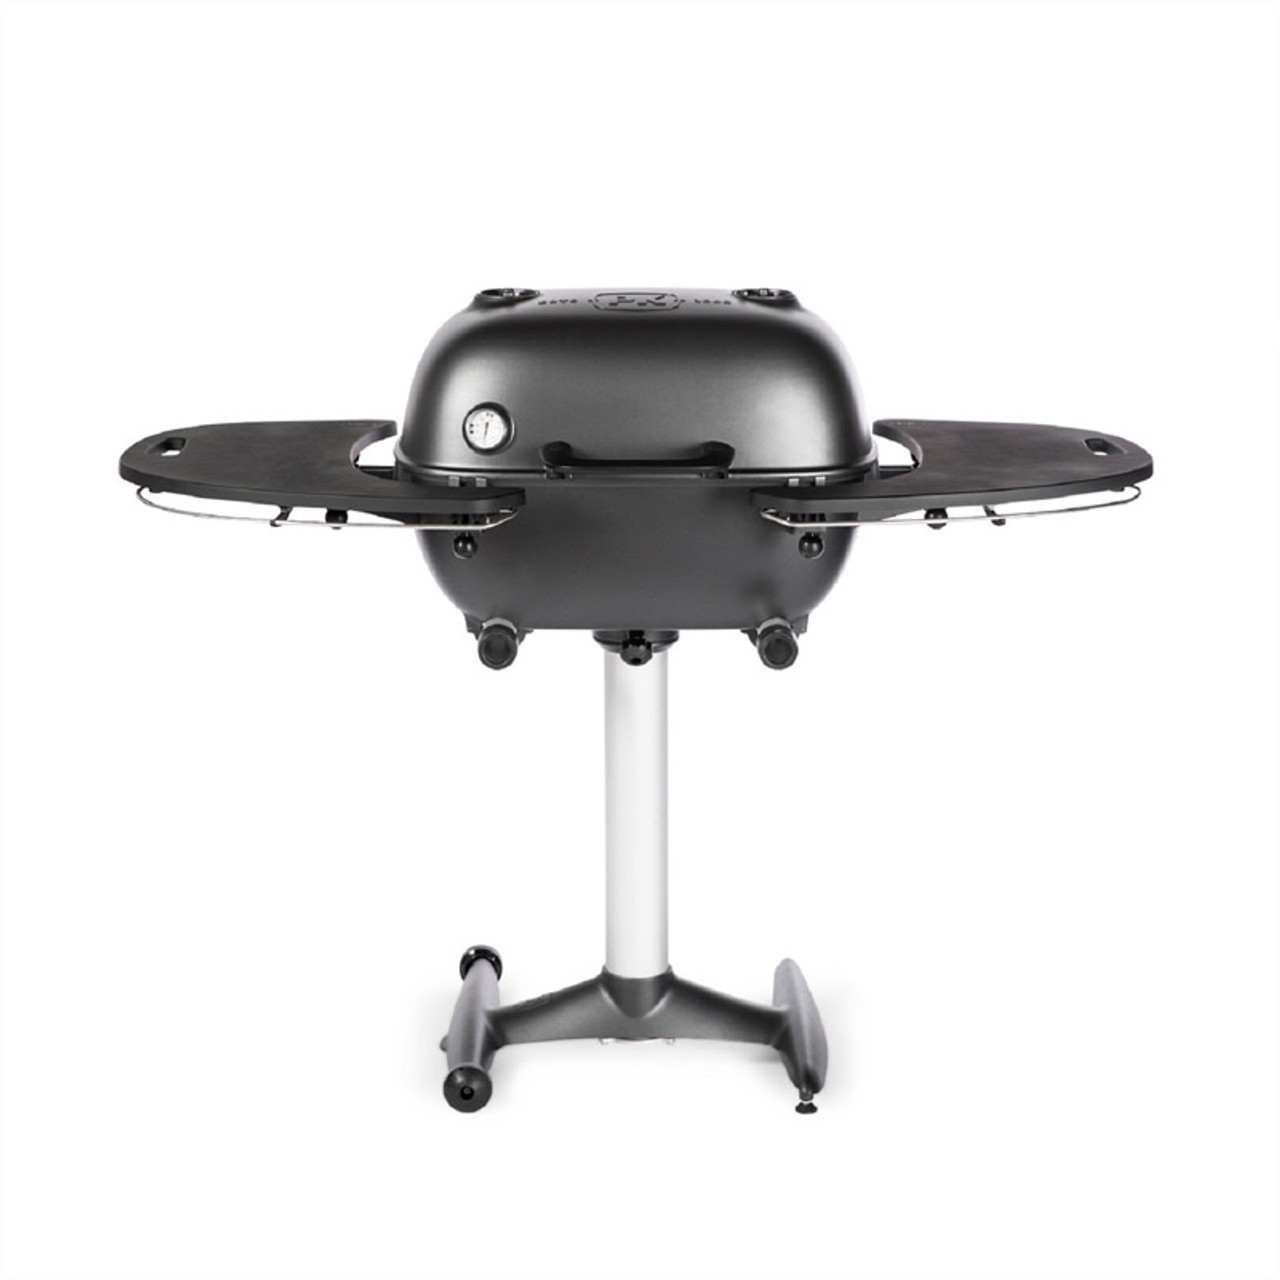 Pk Grills 54 in. PK360 Charcoal Grill and Smoker Silver